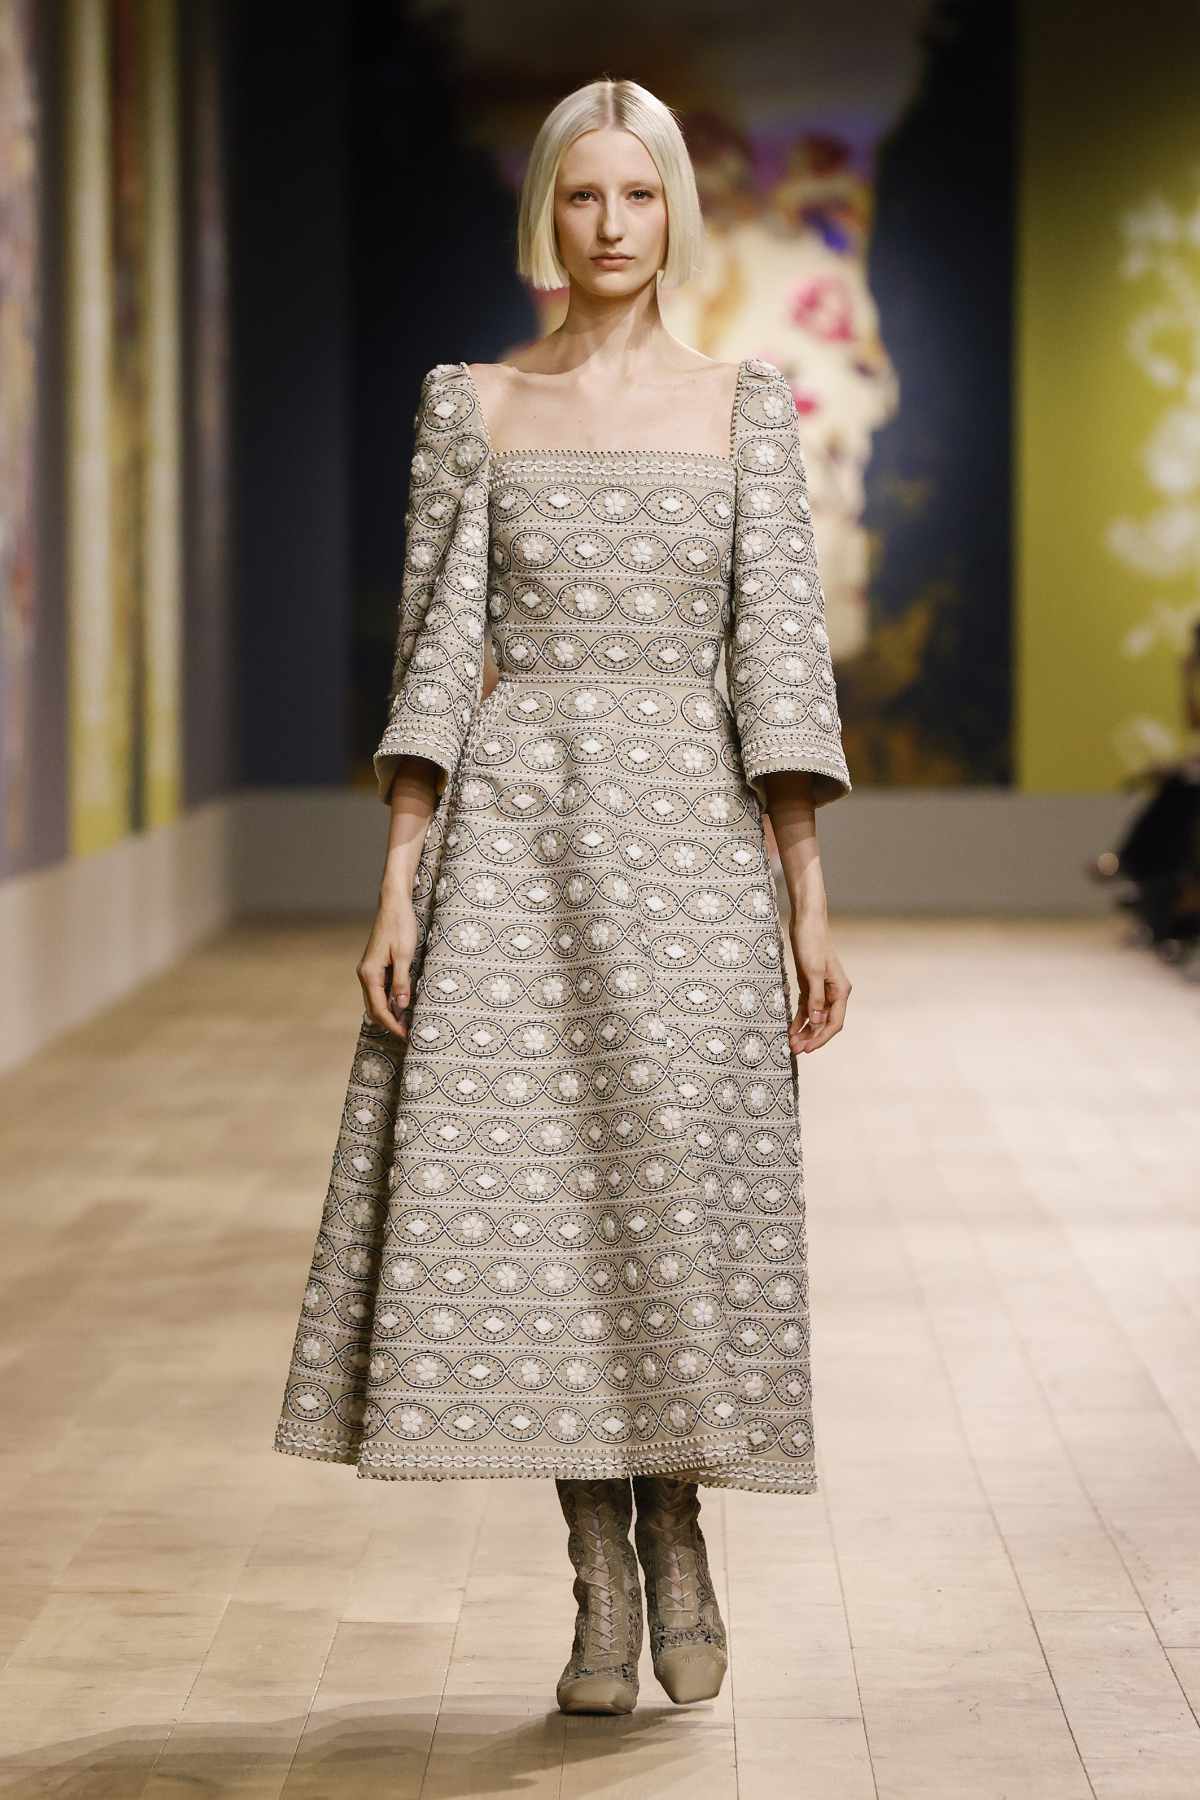 Dior Presents Its New Autumn-Winter 2022-2023 Haute Couture Collection